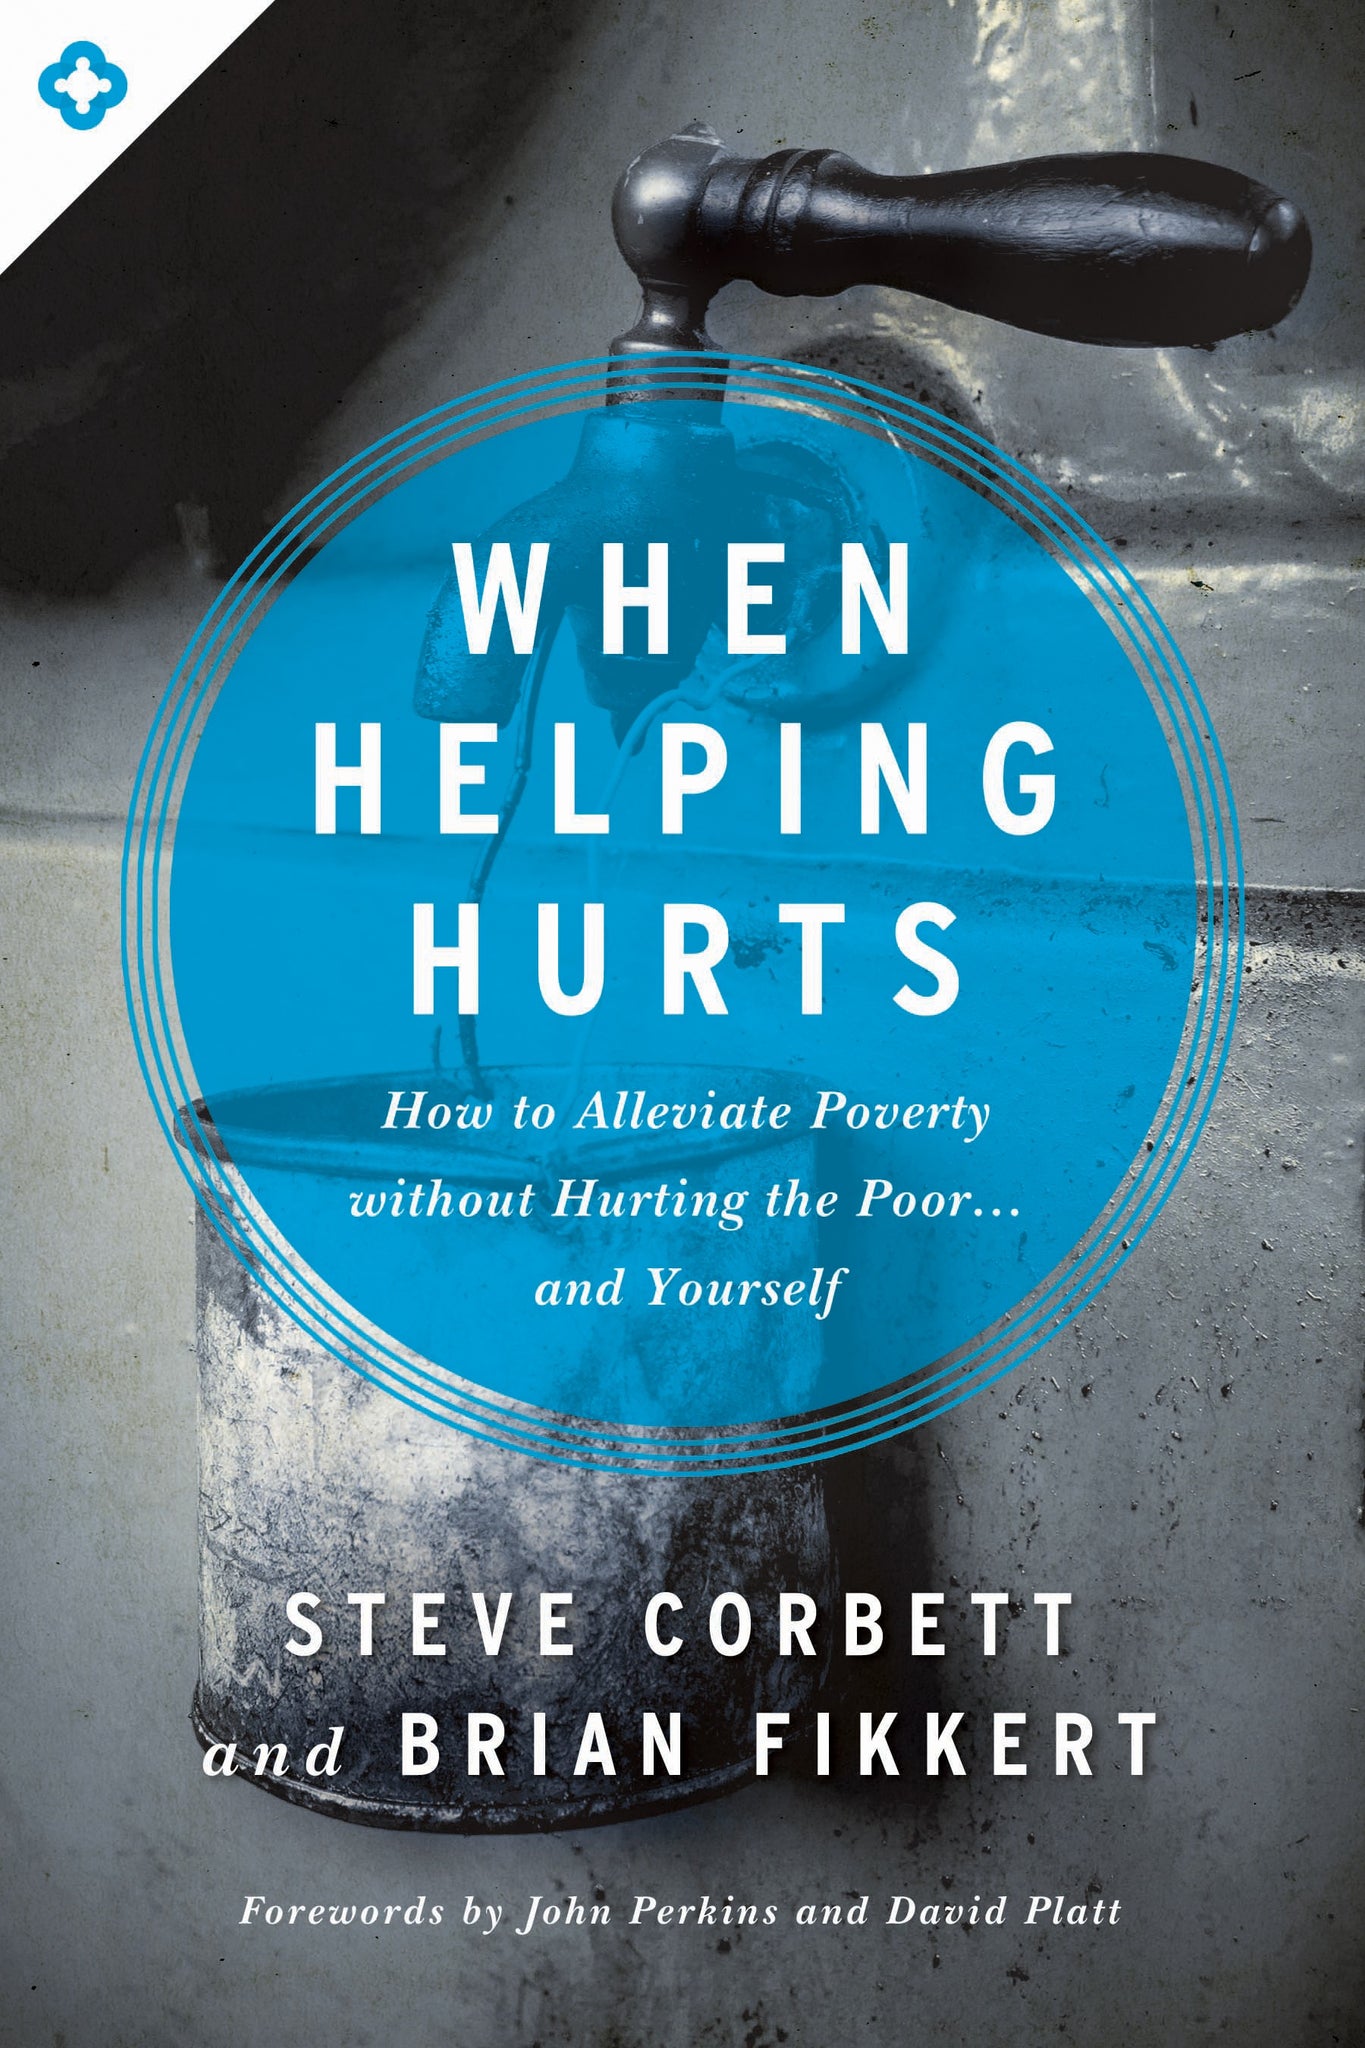 When Helping Hurts: How to Alleviate Poverty Without Hurting the Poor. . . and Yourself